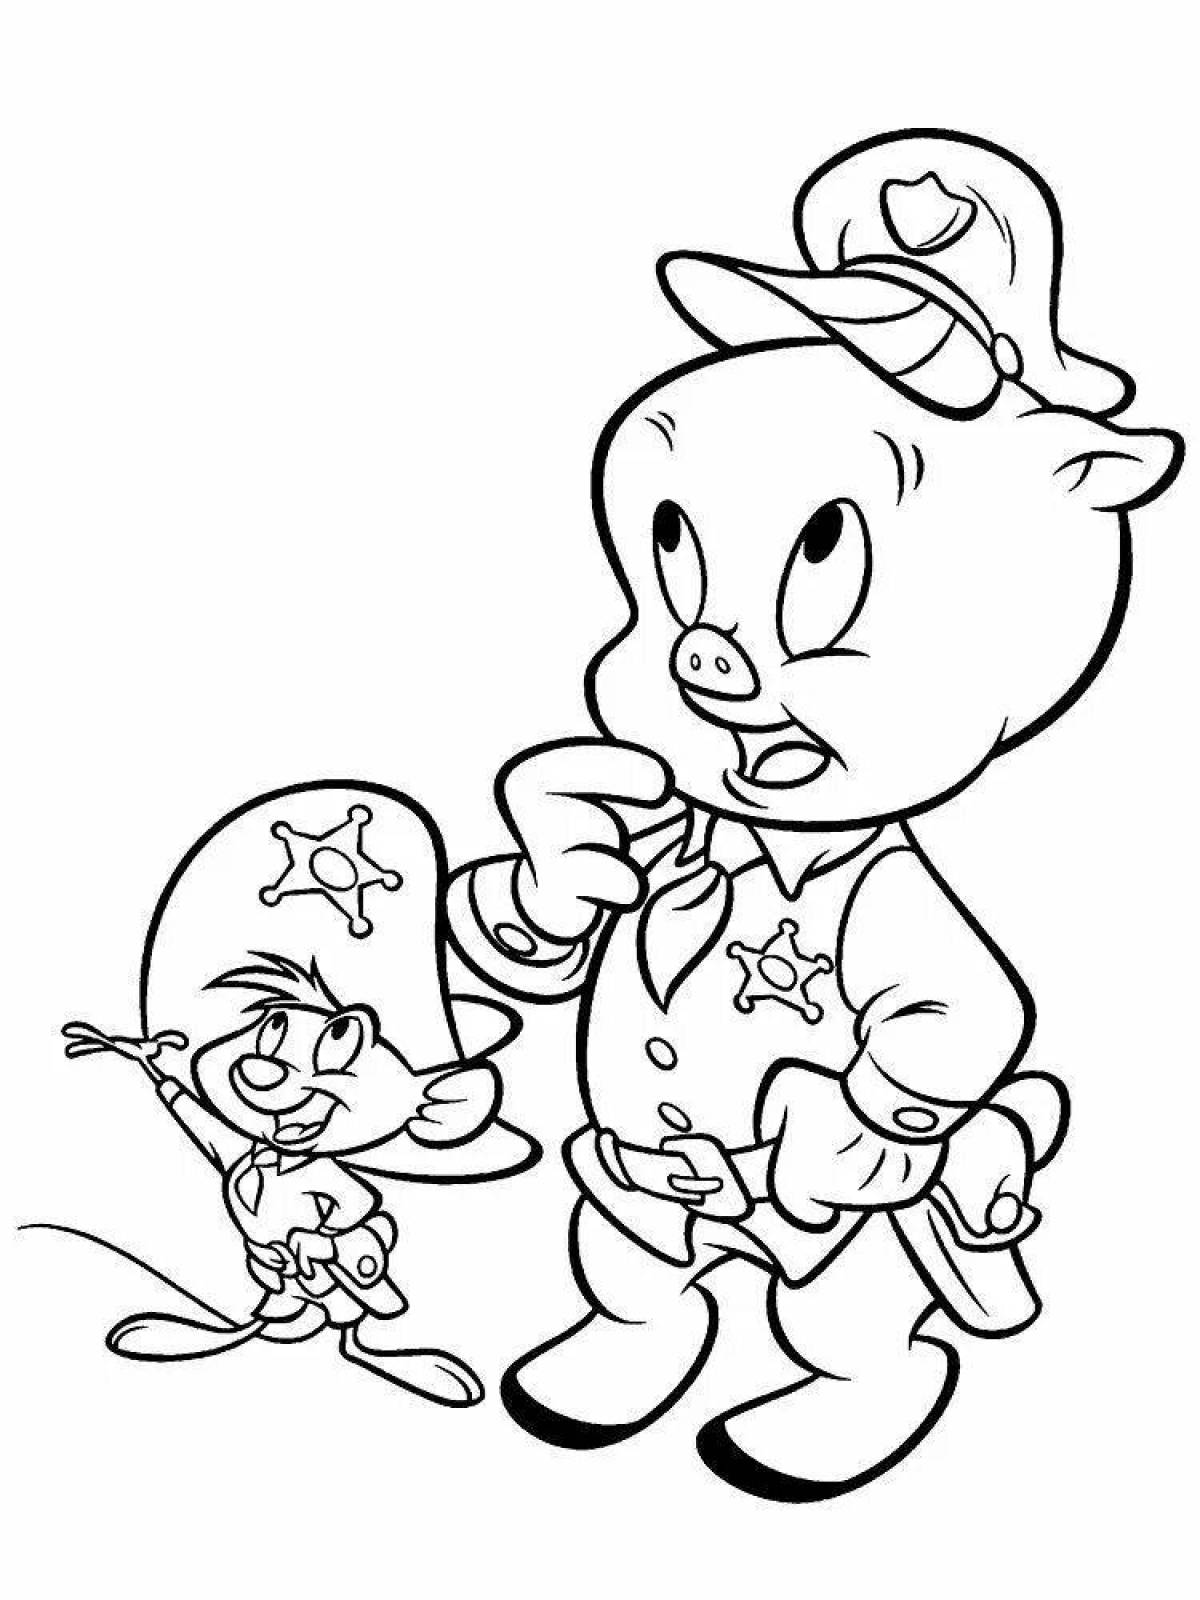 Coloring book colorful cartoon characters